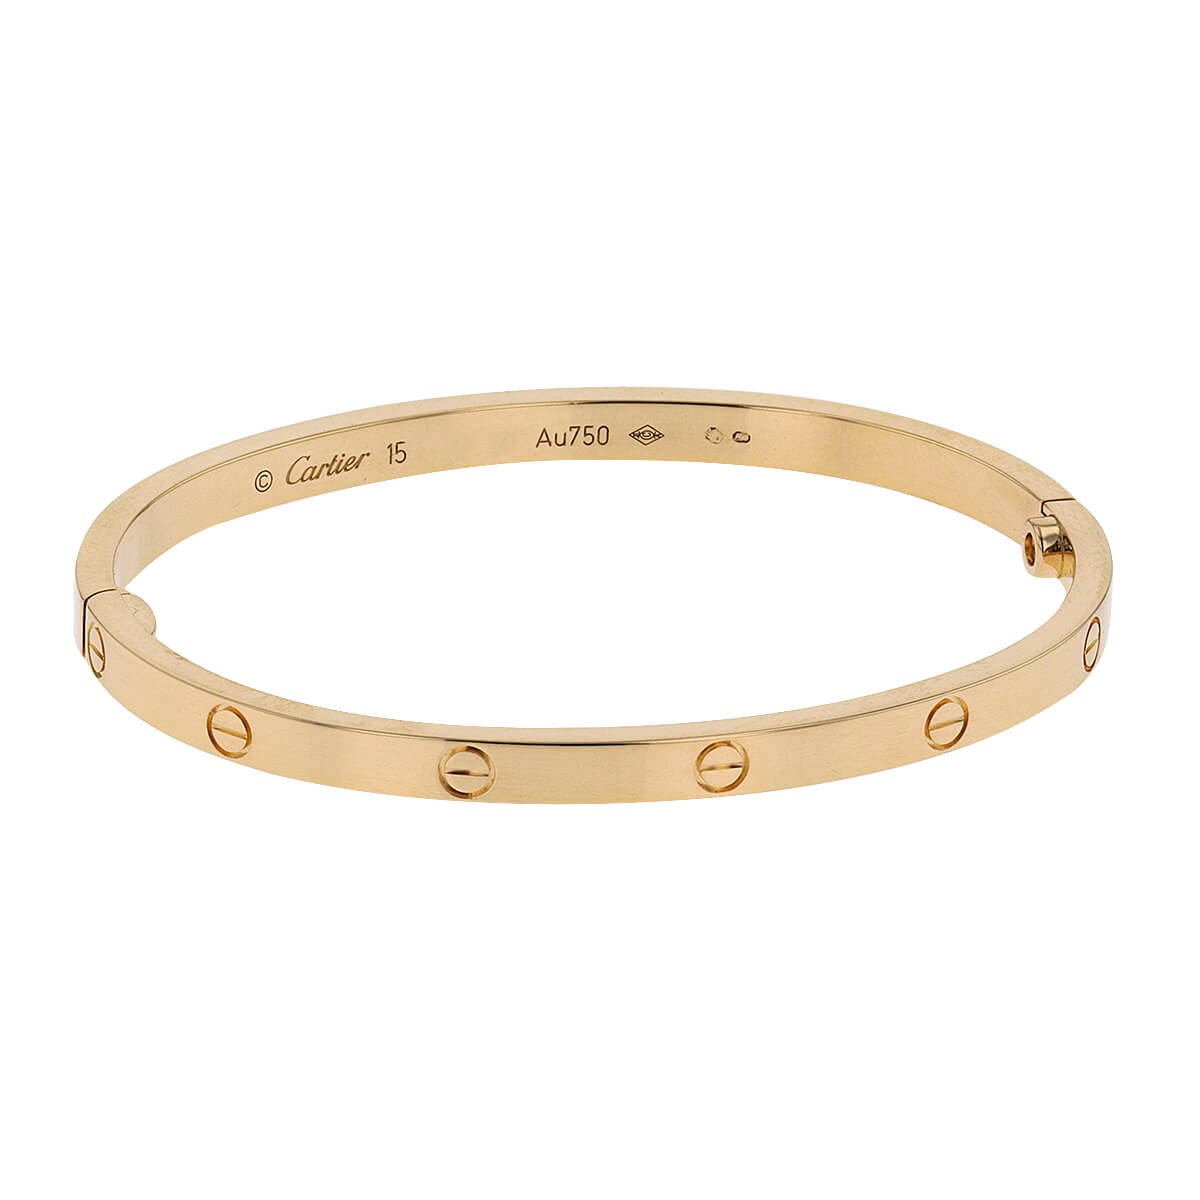 Solid 18k yellow gold, Cartier love bracelet Size 15-21cm Still in stock!  Gold weight about 30-32g | Cartier love bracelet, Bracelet sizes, Fashion  watches